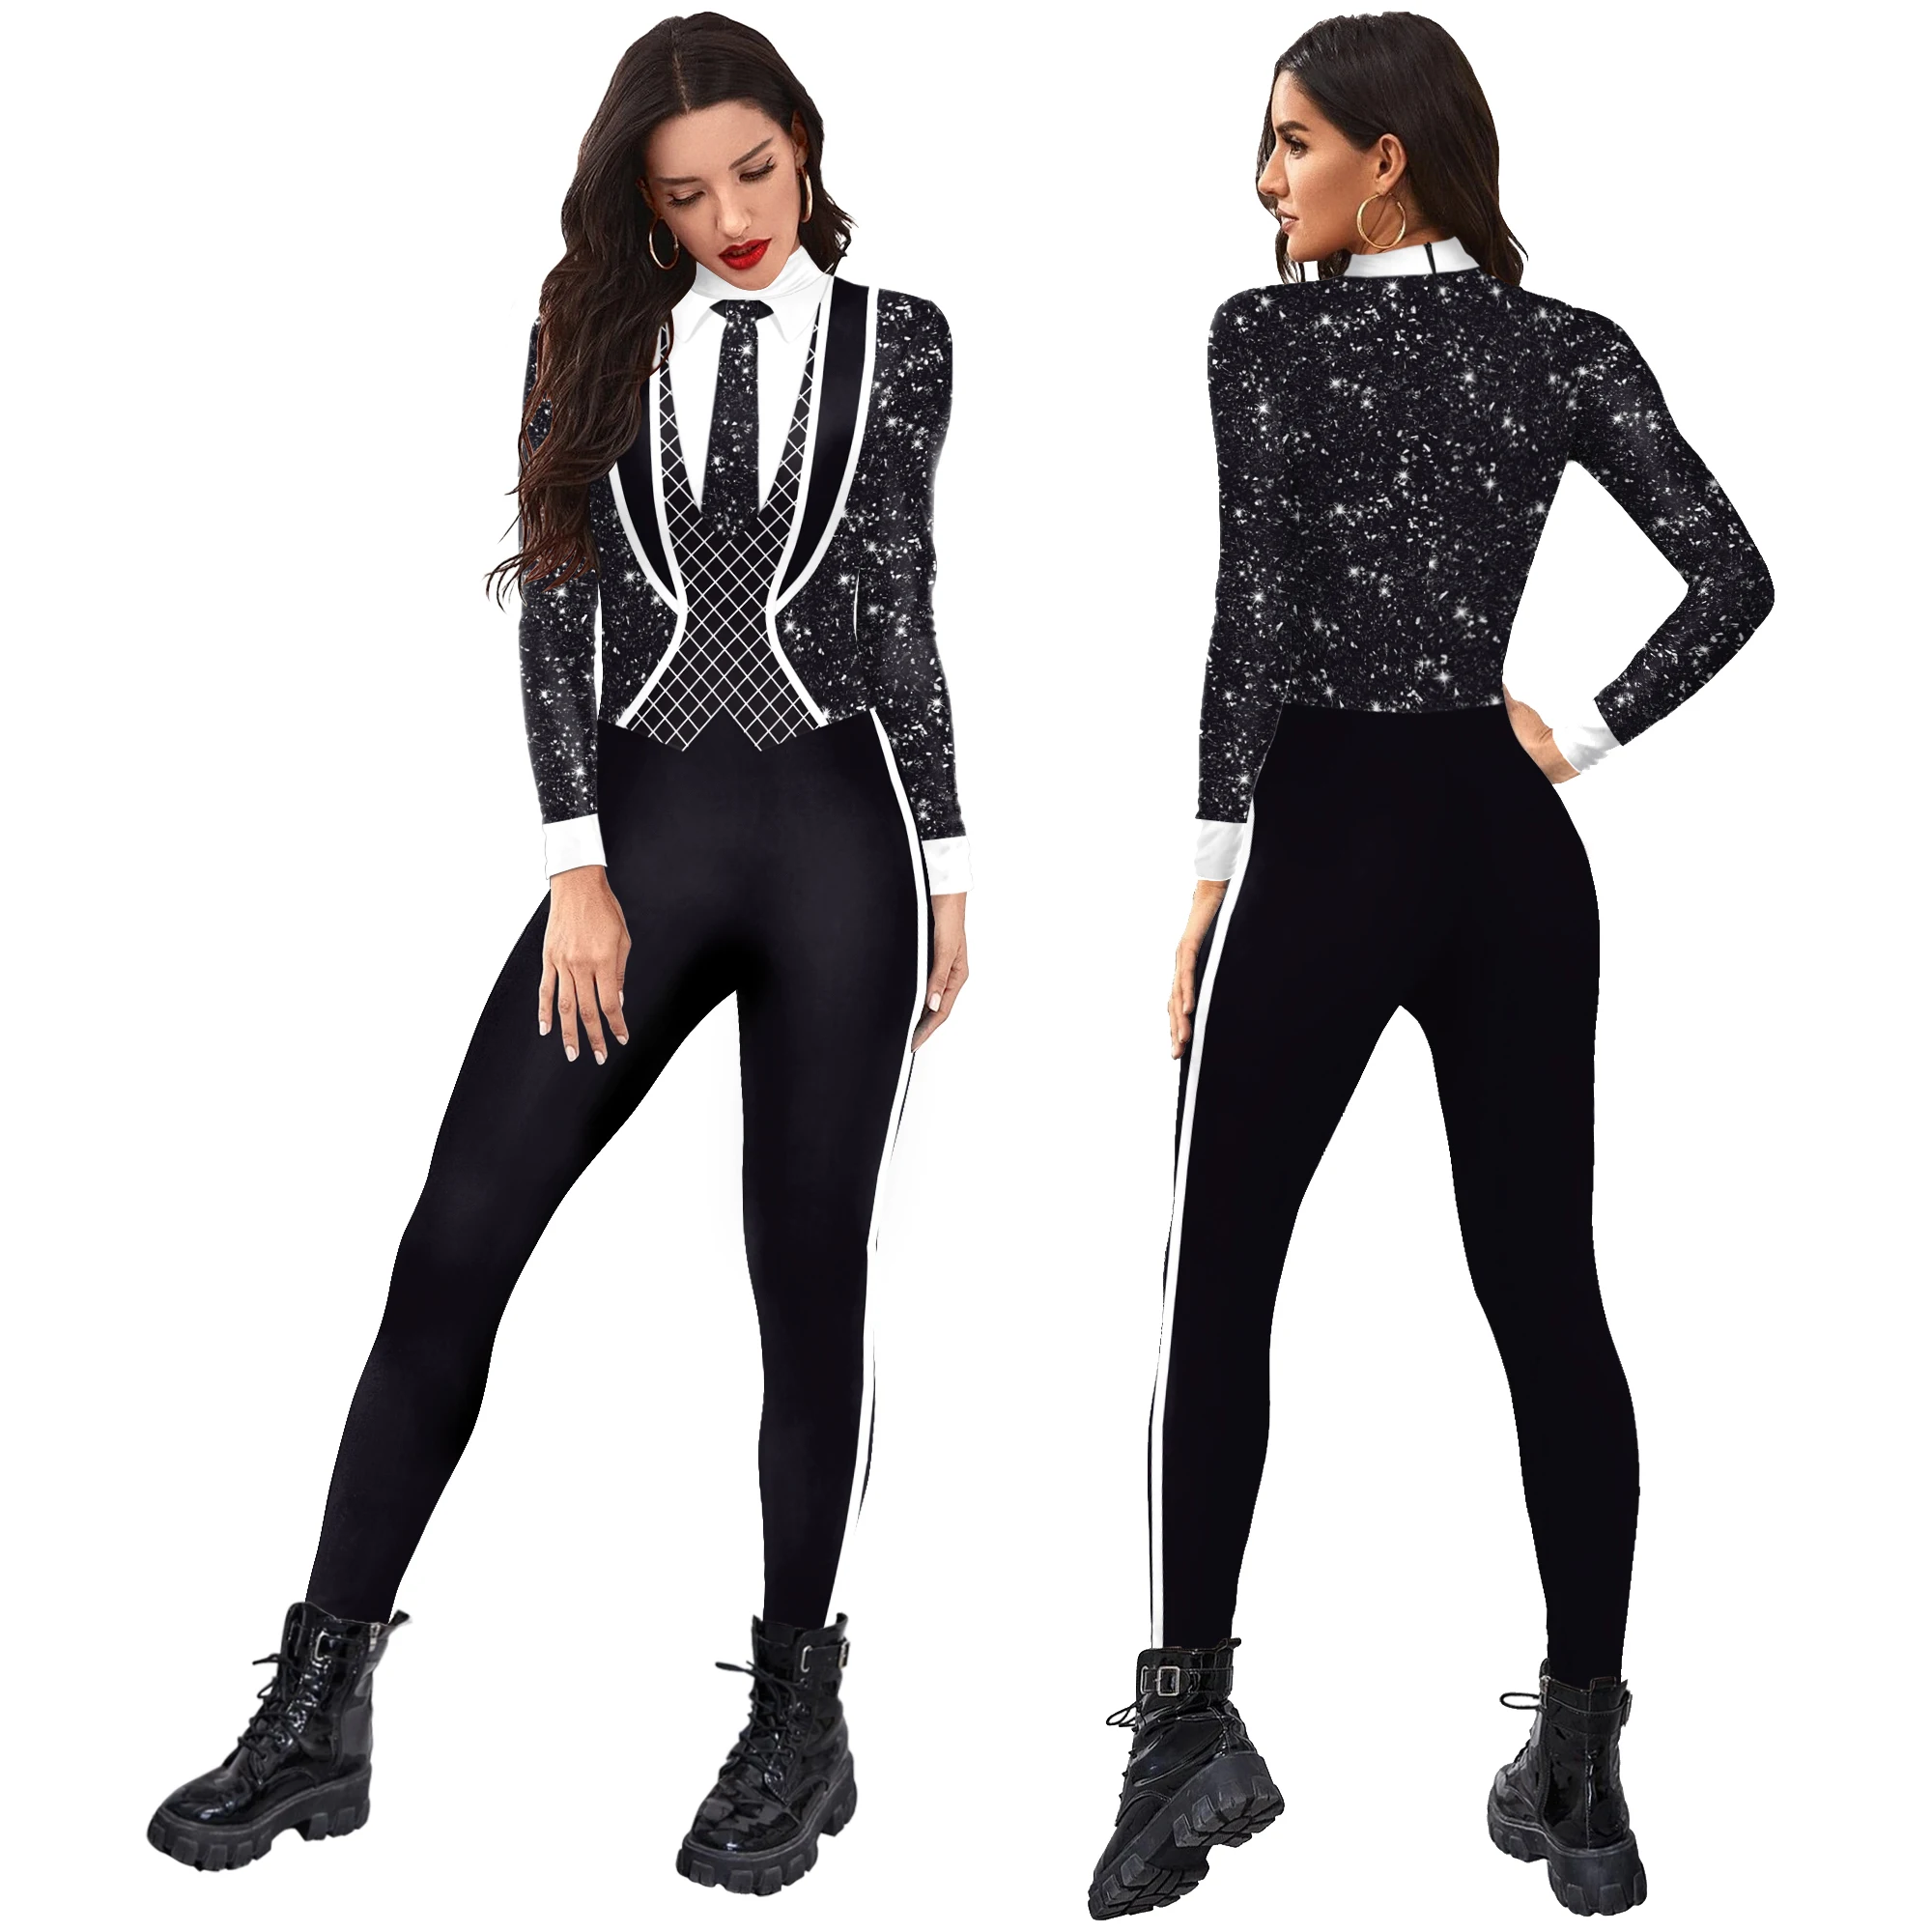 

Formal Pants Suit Black and White Printed Spandex Catsuit Cosplay Carnival Party Fake Lapel Tie Zentai Cosplay Jumpsuit Dating